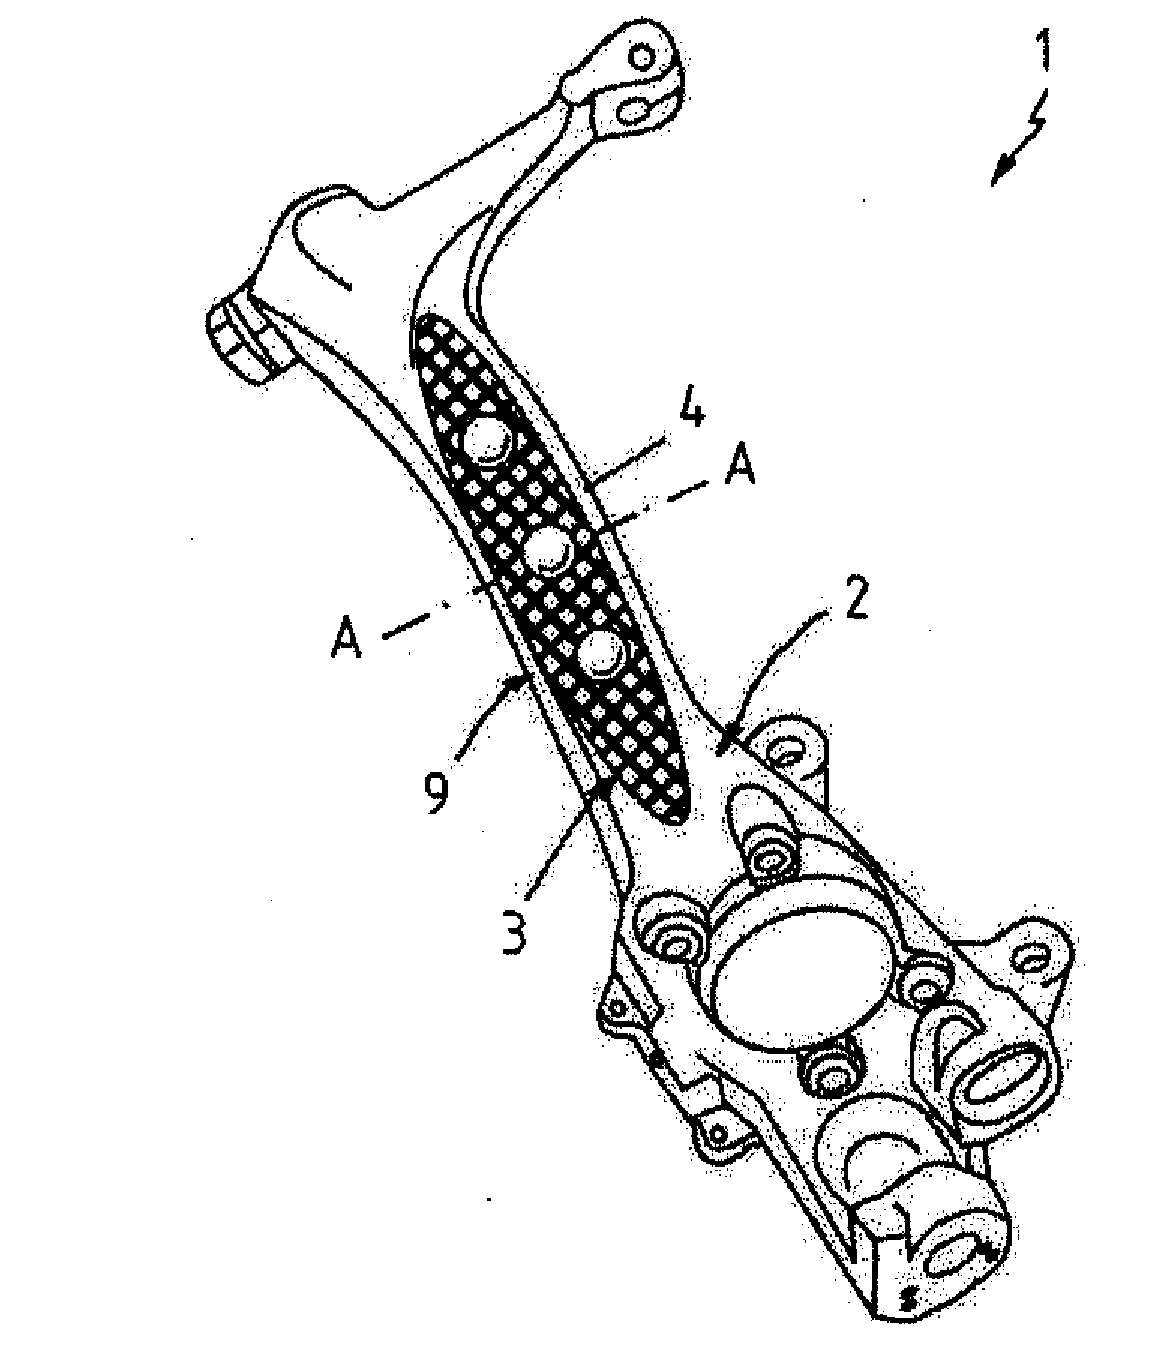 Chassis structure for a motor vehicle